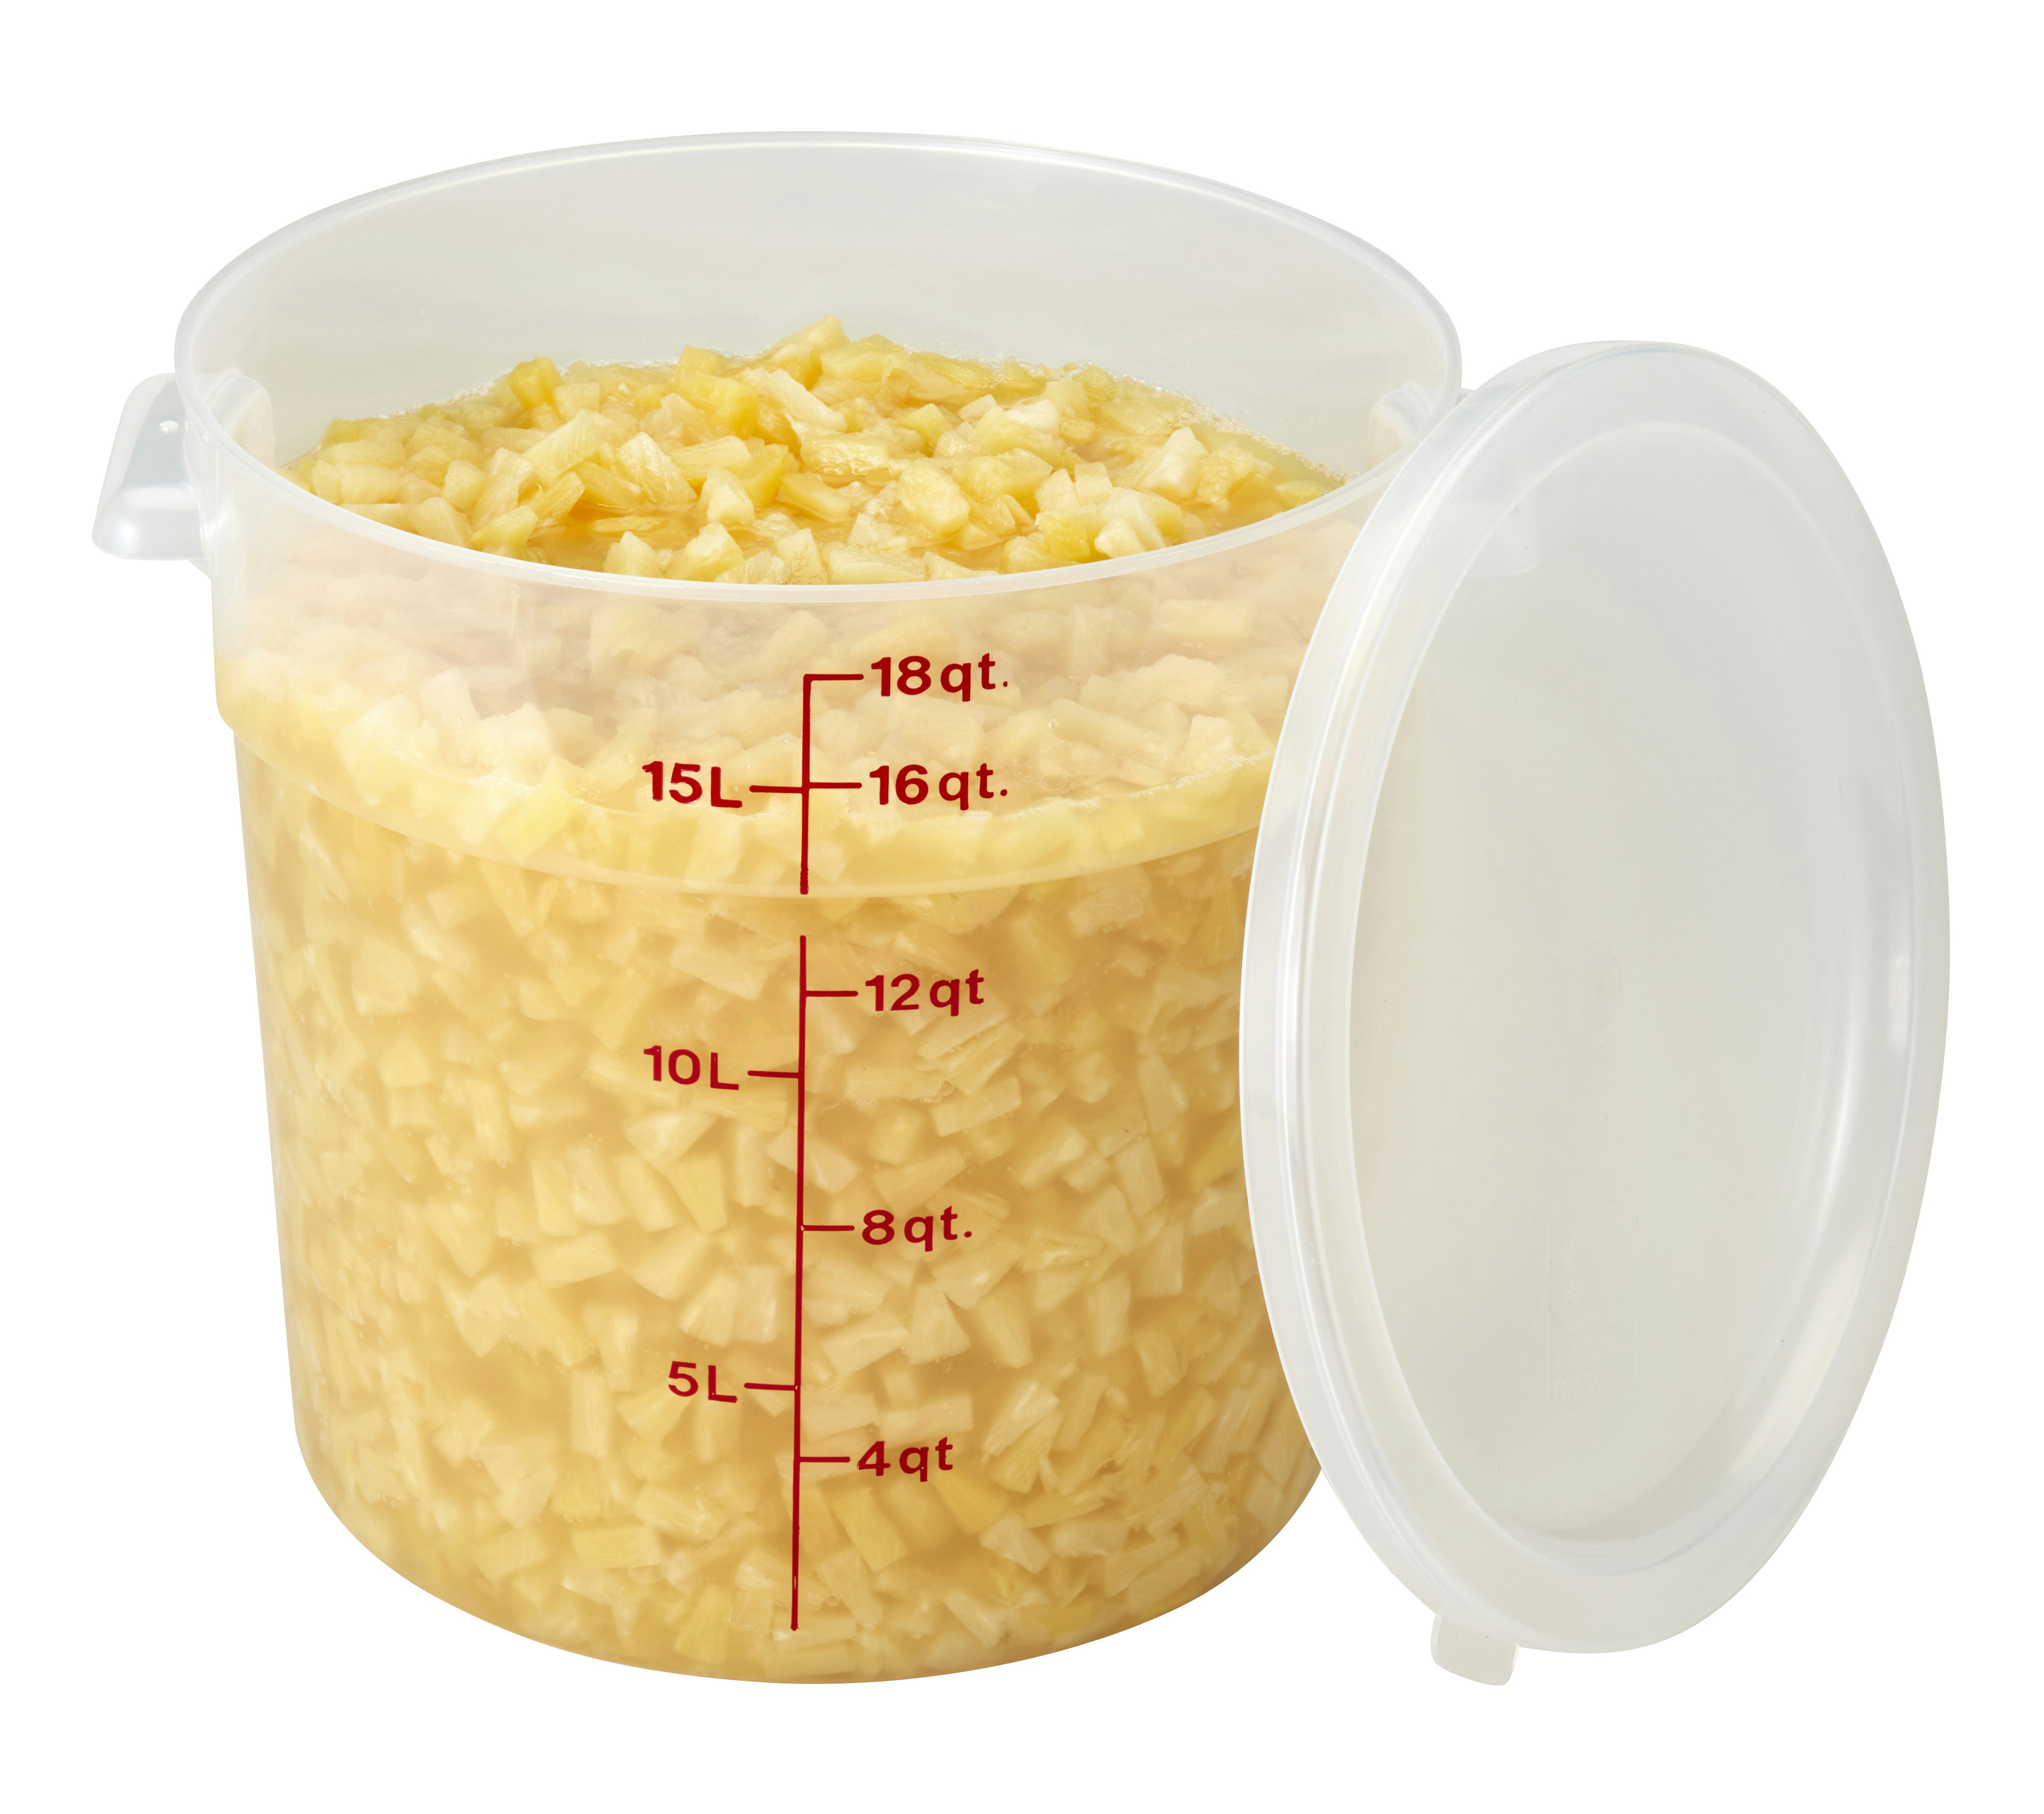 Choice 12 Qt. Translucent Round Polypropylene Food Storage Container and Lid